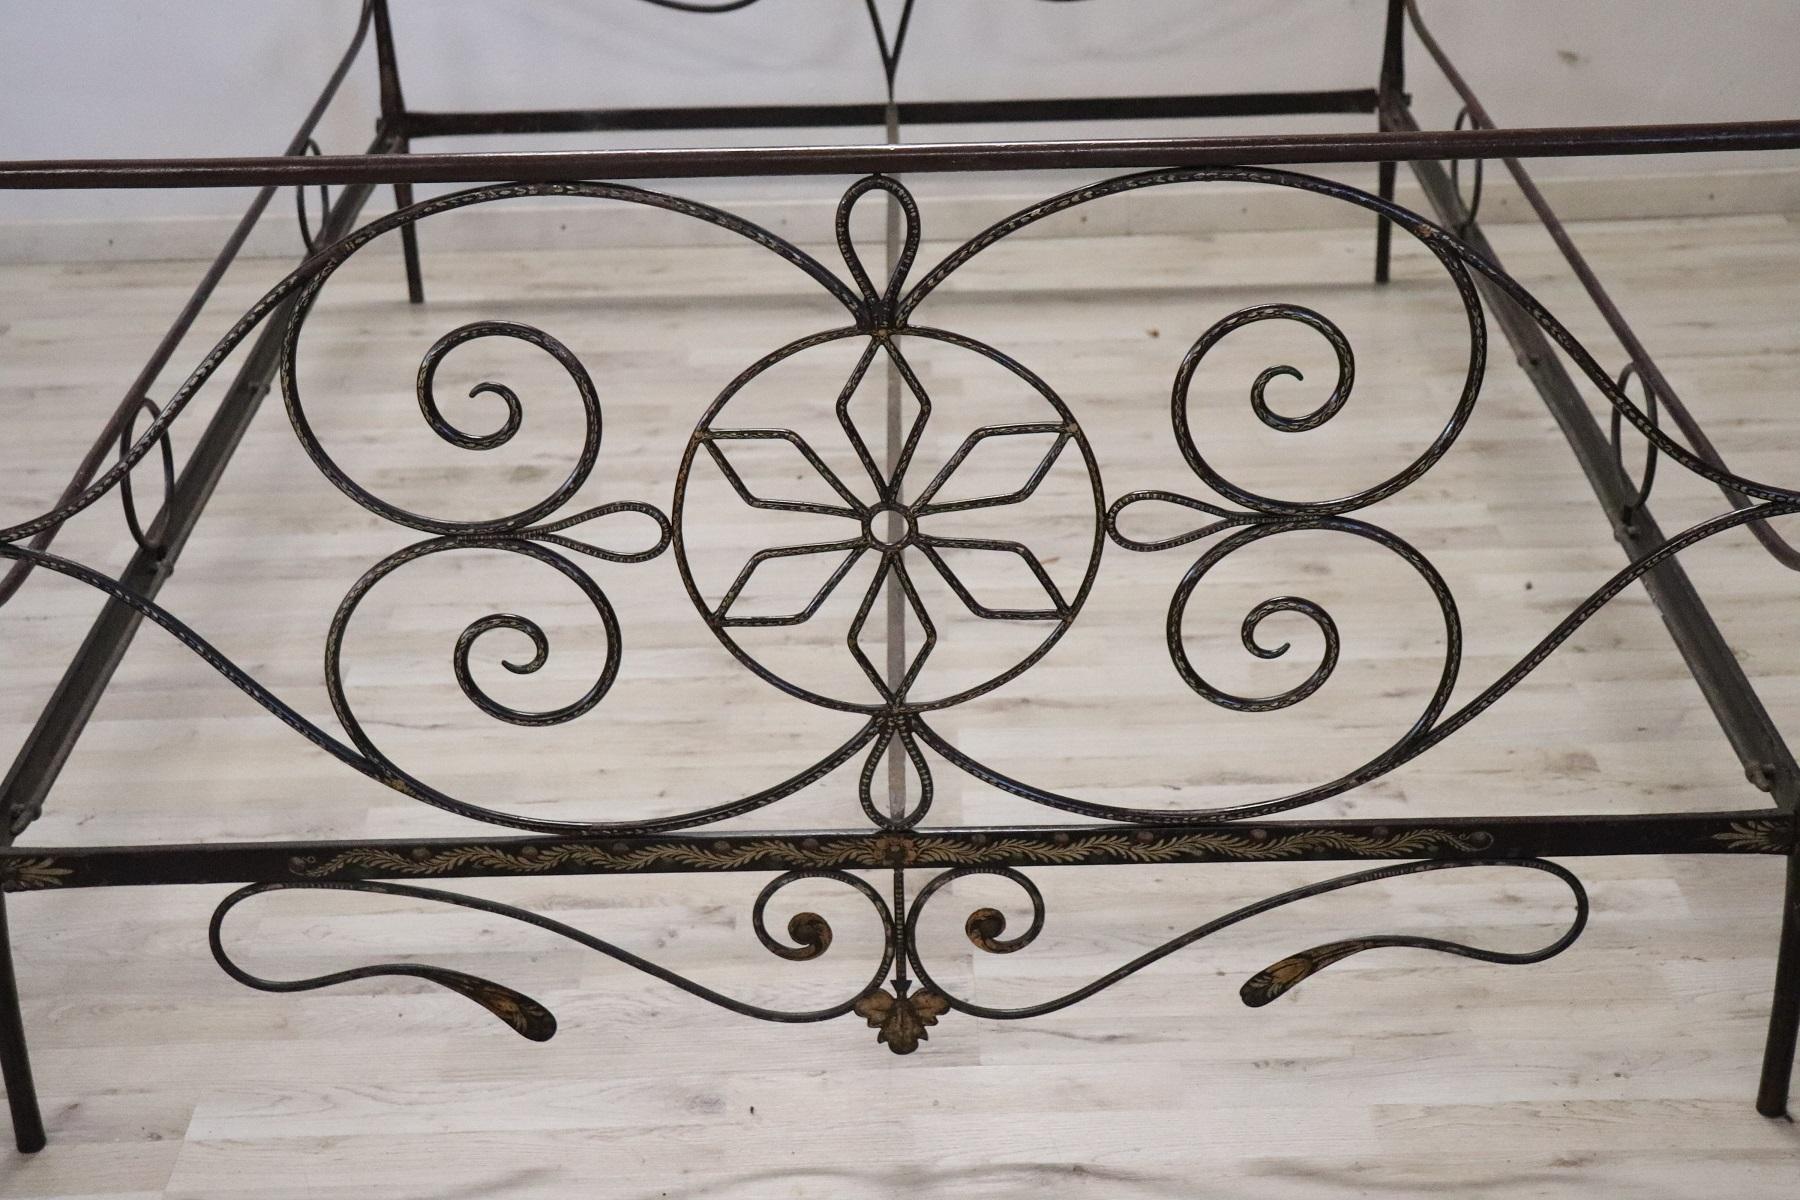 Delicious Italian antique large single bed in iron, 1800. An elaborate wrought iron decoration with many curls and swirls. Internal dimensions inch W 58,26 D 77,16 cm W 148, D 196. Attention this bed will be shipped disassembled, assembly is not